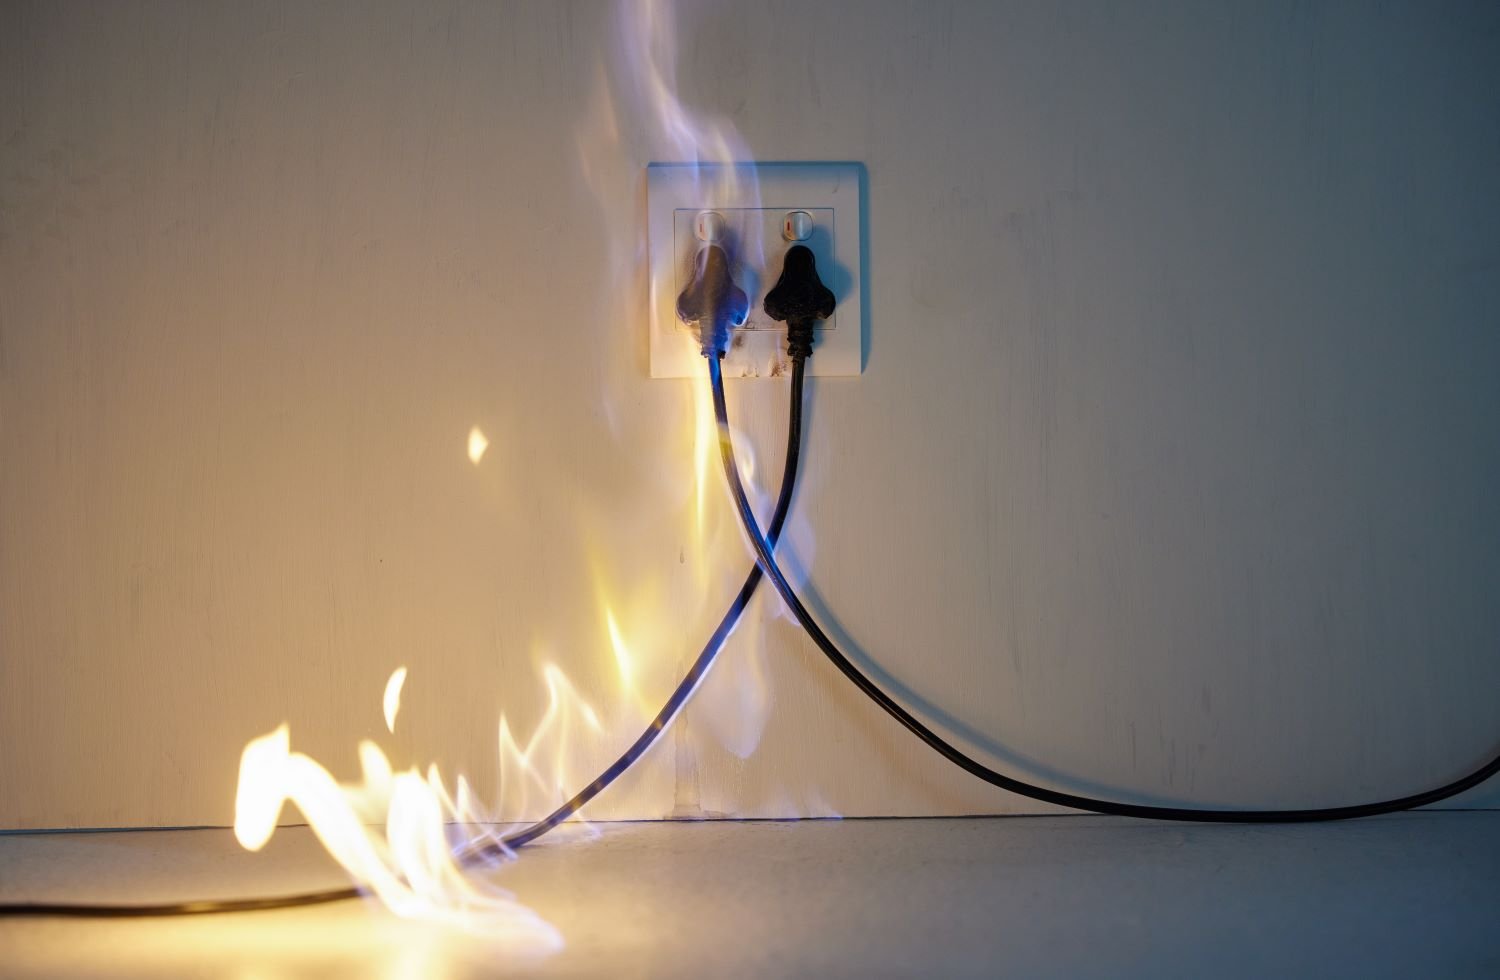 Electrical Safety at Home: Tips to Avoid Common Hazards